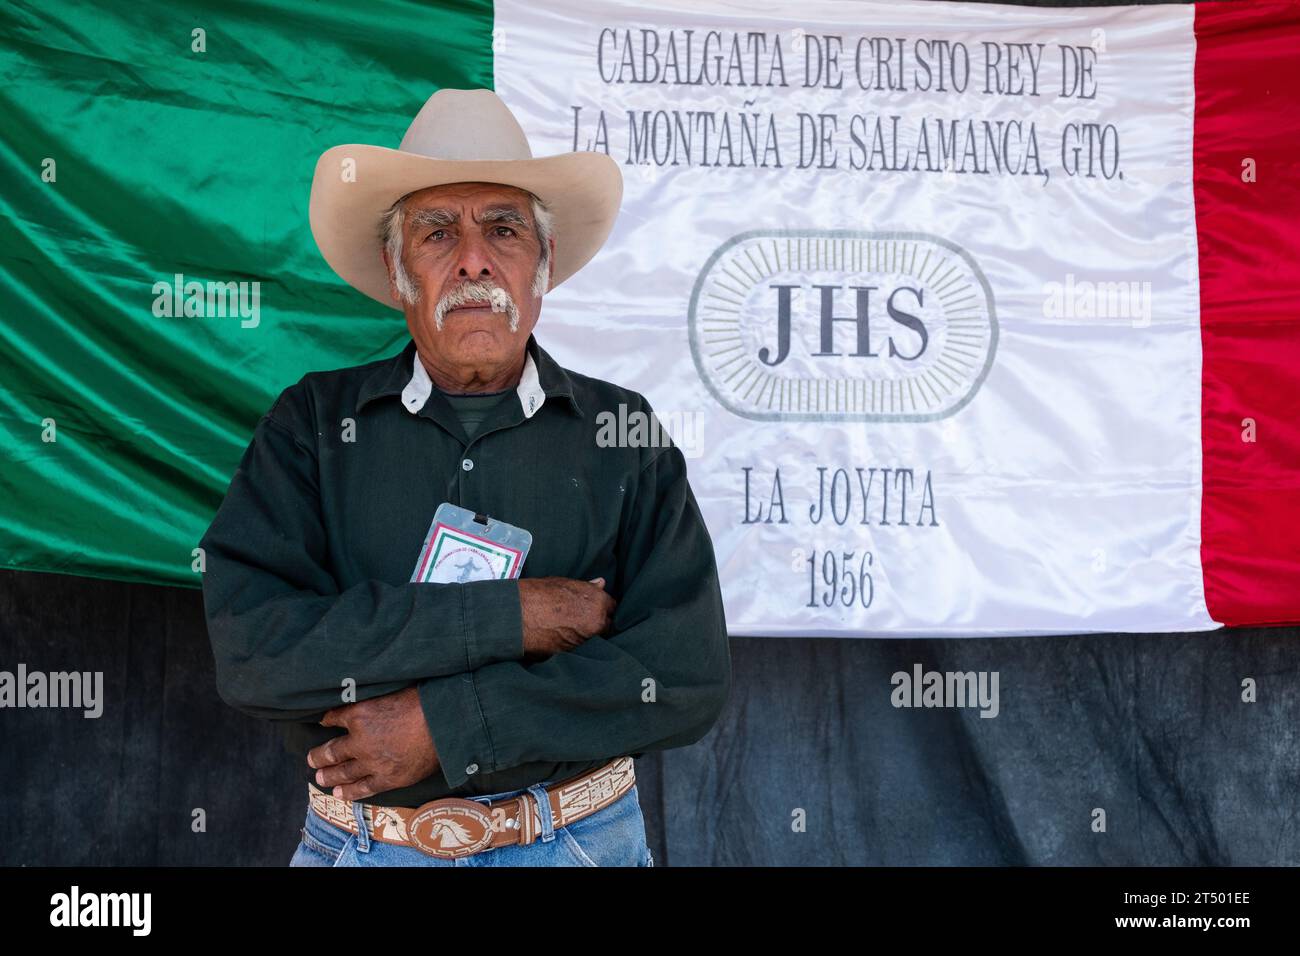 An elderly Mexican cowboy from La Joyita, Chihuahua state, poses by his groups banner during the annual Cabalgata de Cristo Rey pilgrimage, January 5, 2019 in Salamanca, Guanajuato, Mexico. Thousands of Mexican cowboys and horse take part in the three-day ride to the mountaintop shrine of Cristo Rey. Stock Photo